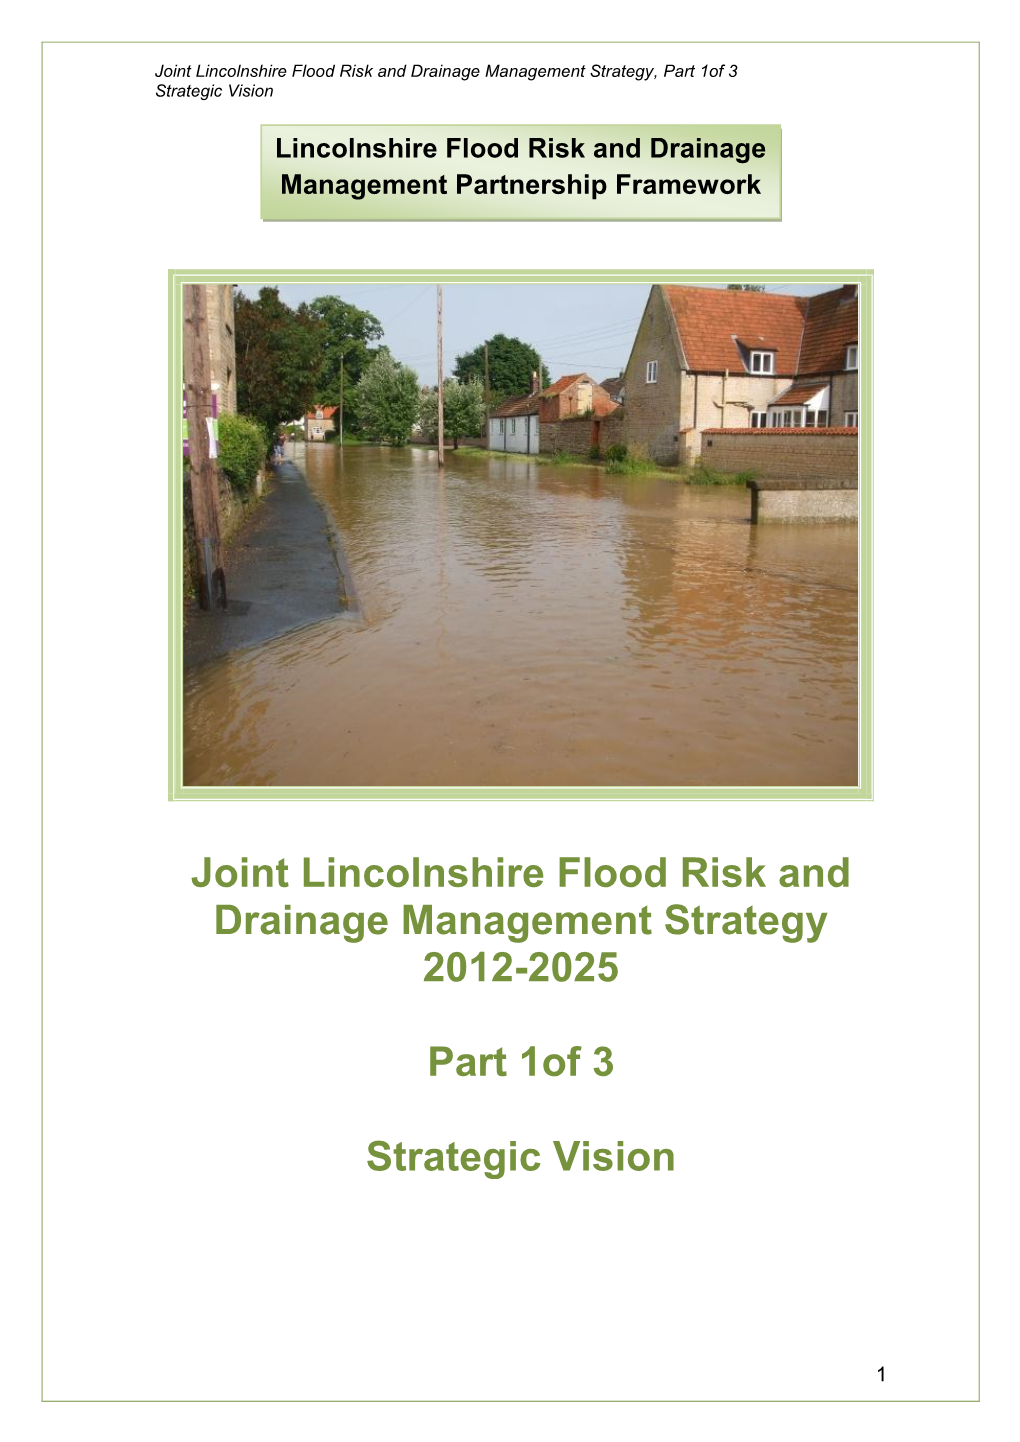 Joint Lincolnshire Flood Risk and Drainage Management Strategy, Part 1Of 3 Strategic Vision